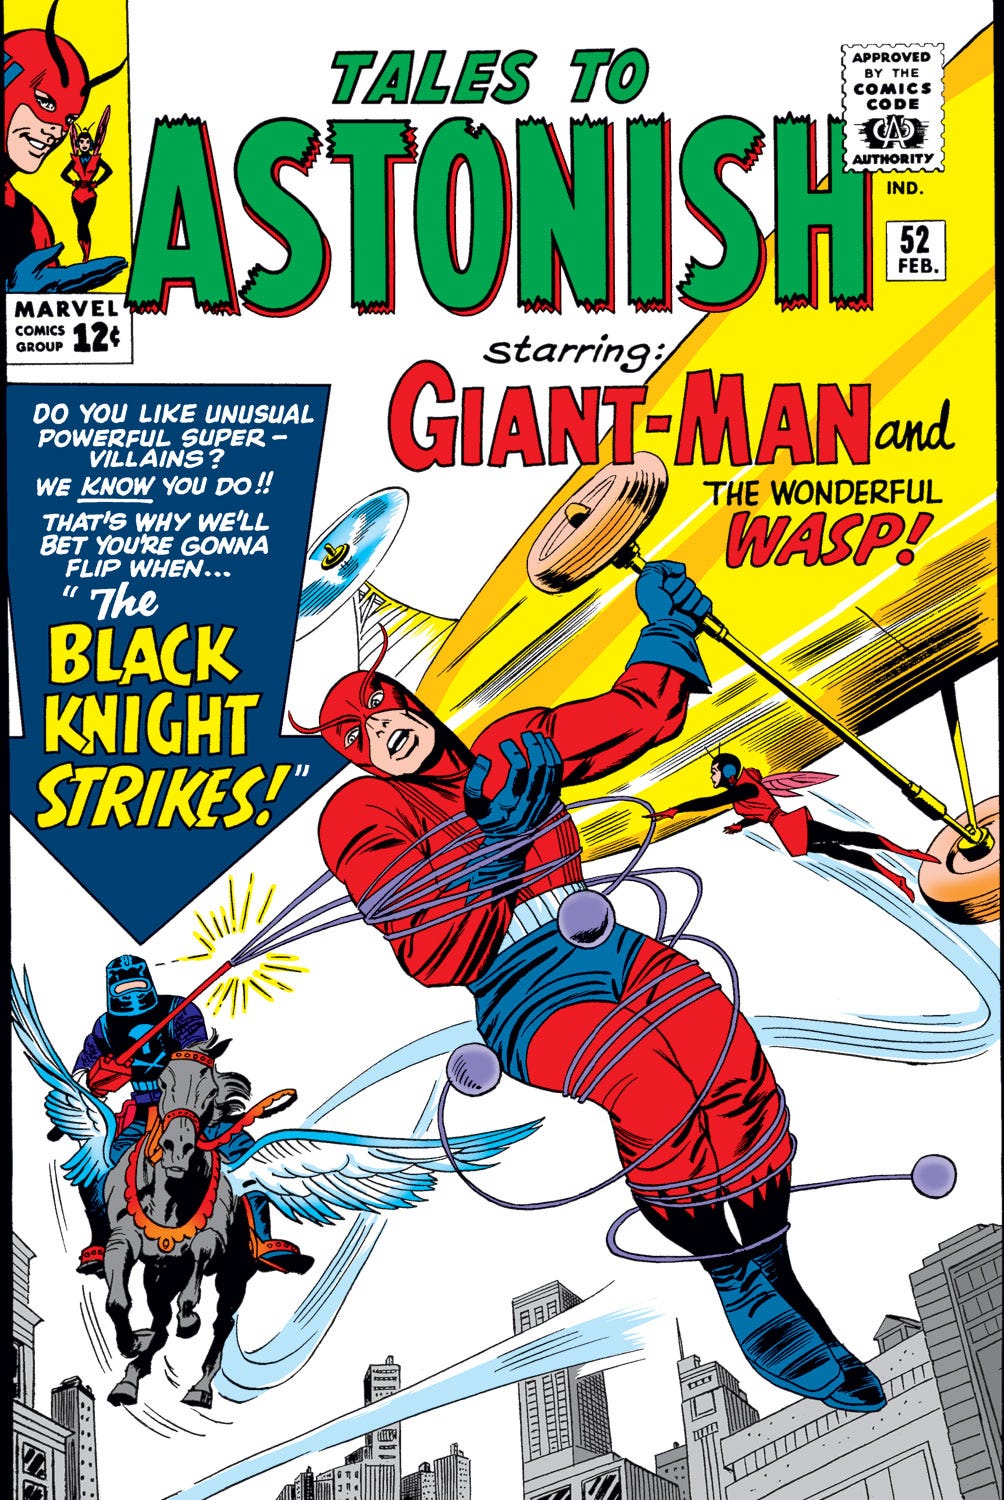 Tales to Astonish (1959) #52 | Comic Issues | Marvel